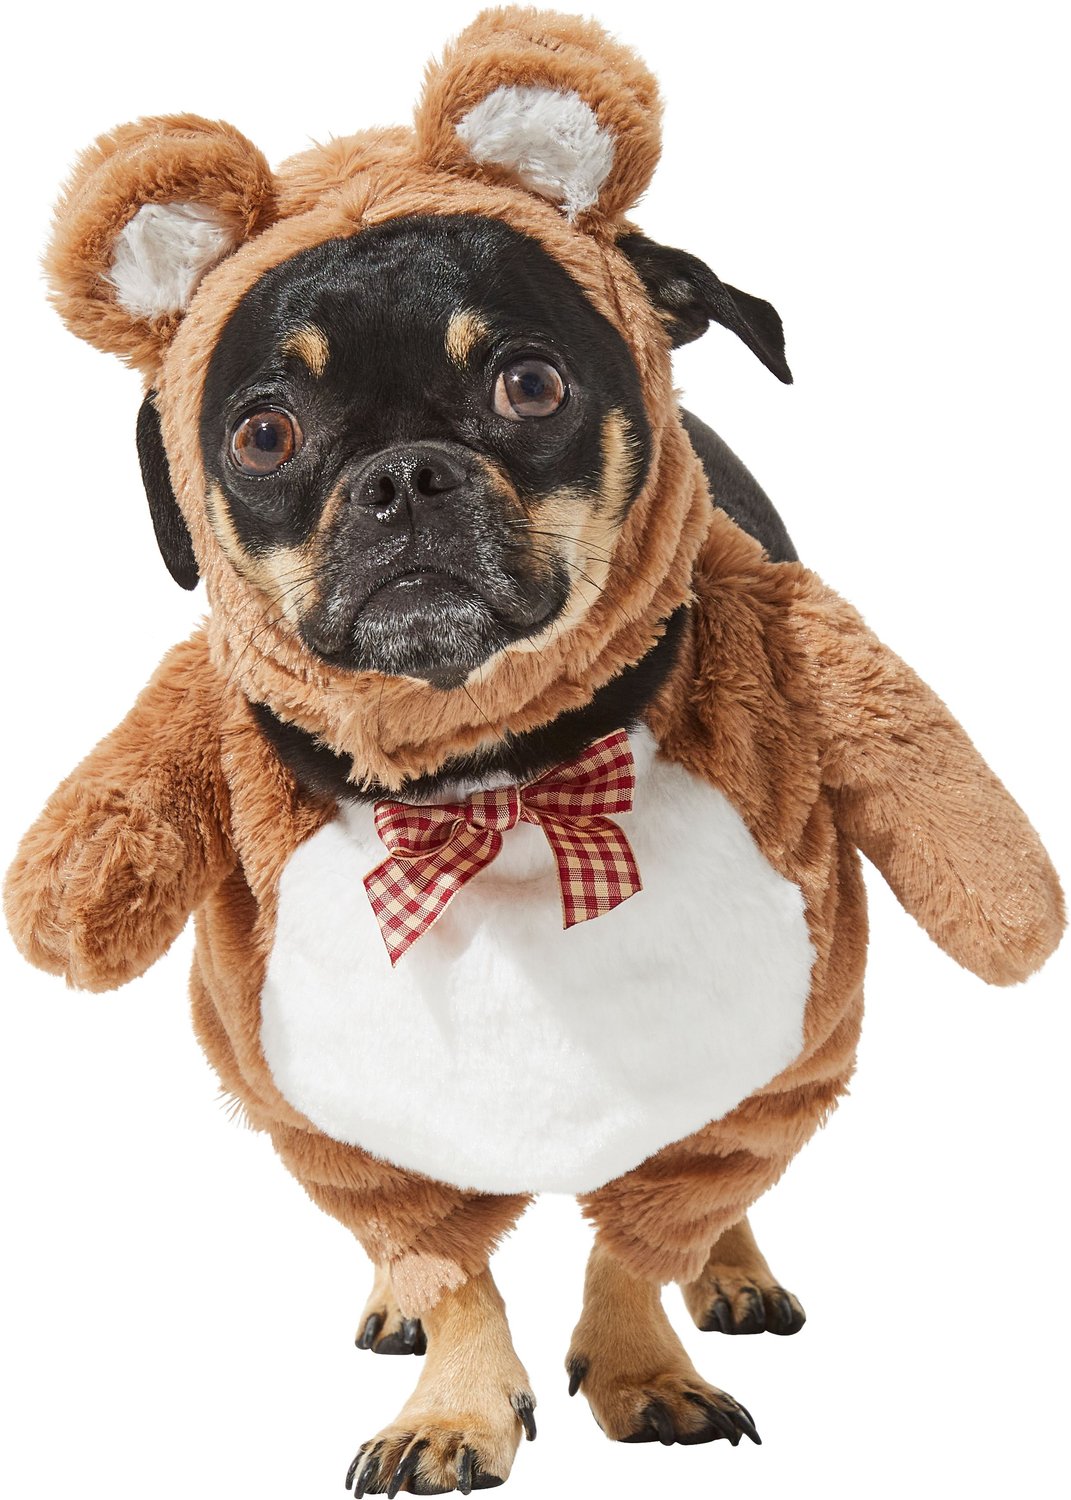 dog and cat wearing a teddy bear Halloween costume